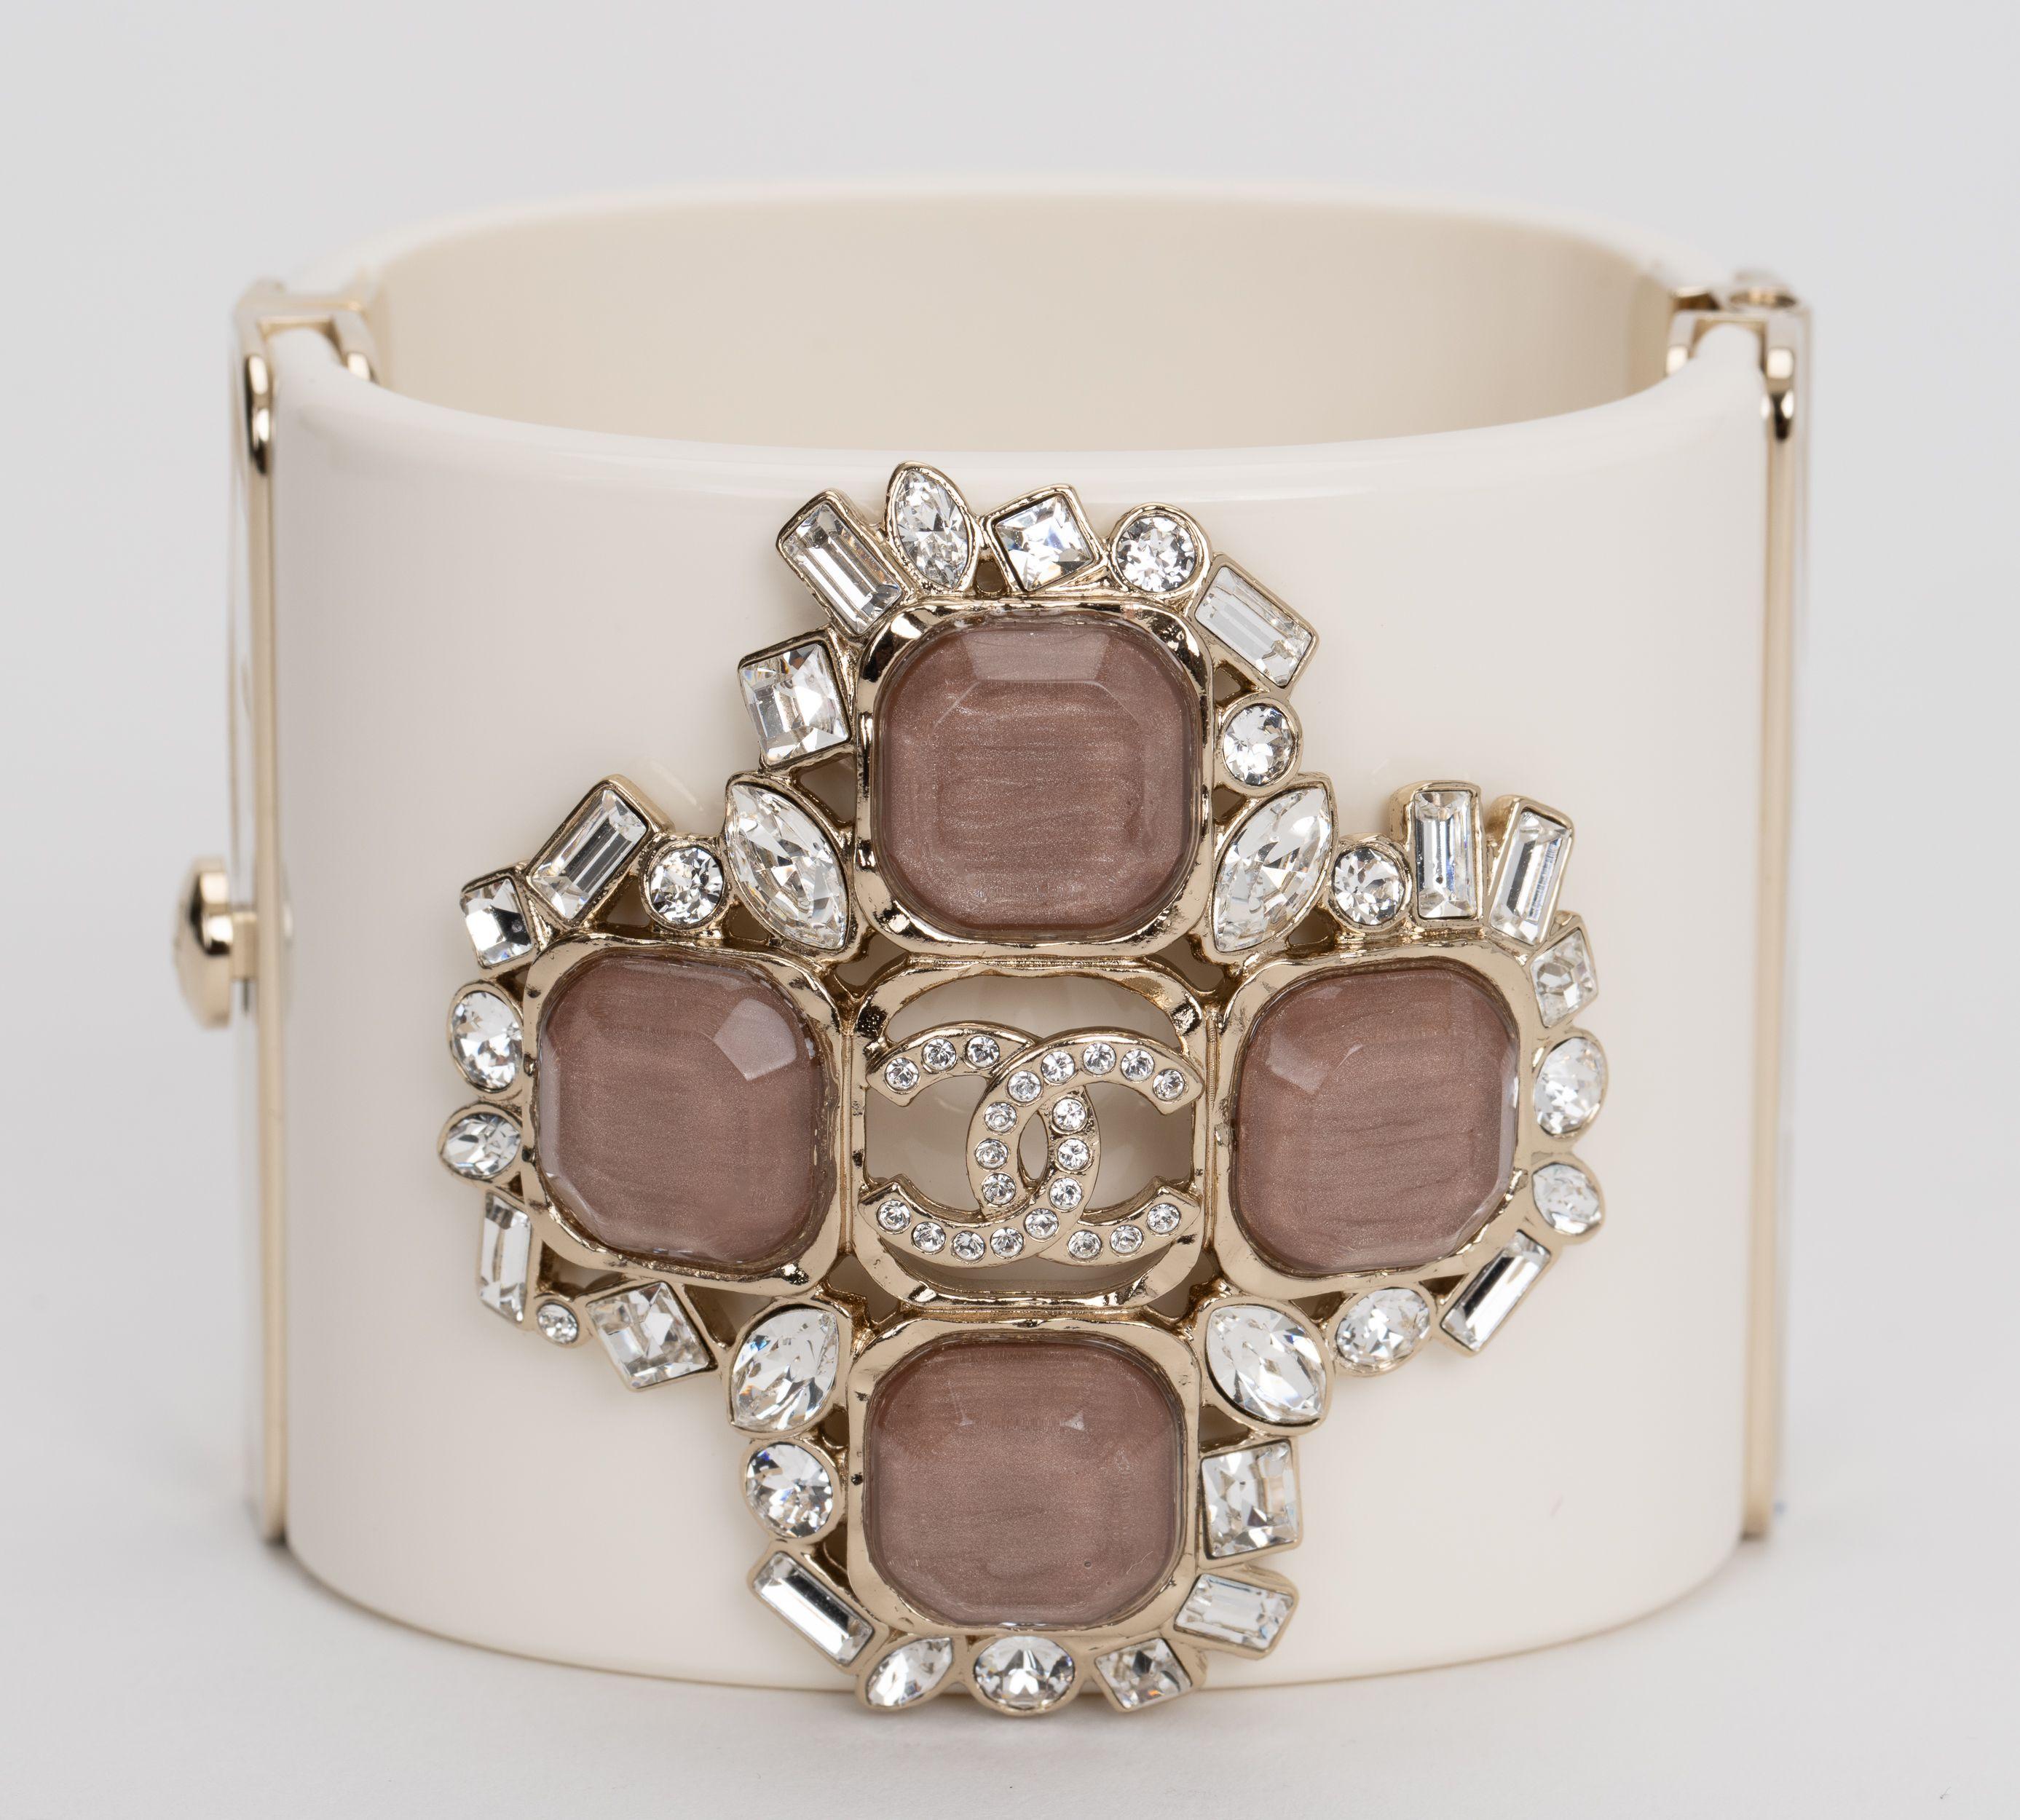 Chanel new in box CC Resin Wide Cuff Bracelet. Perfect for dressing up or down, features CC logo within an embellished design. Spring 2023 collection. Cream resin and pink gripoix.
Size small.